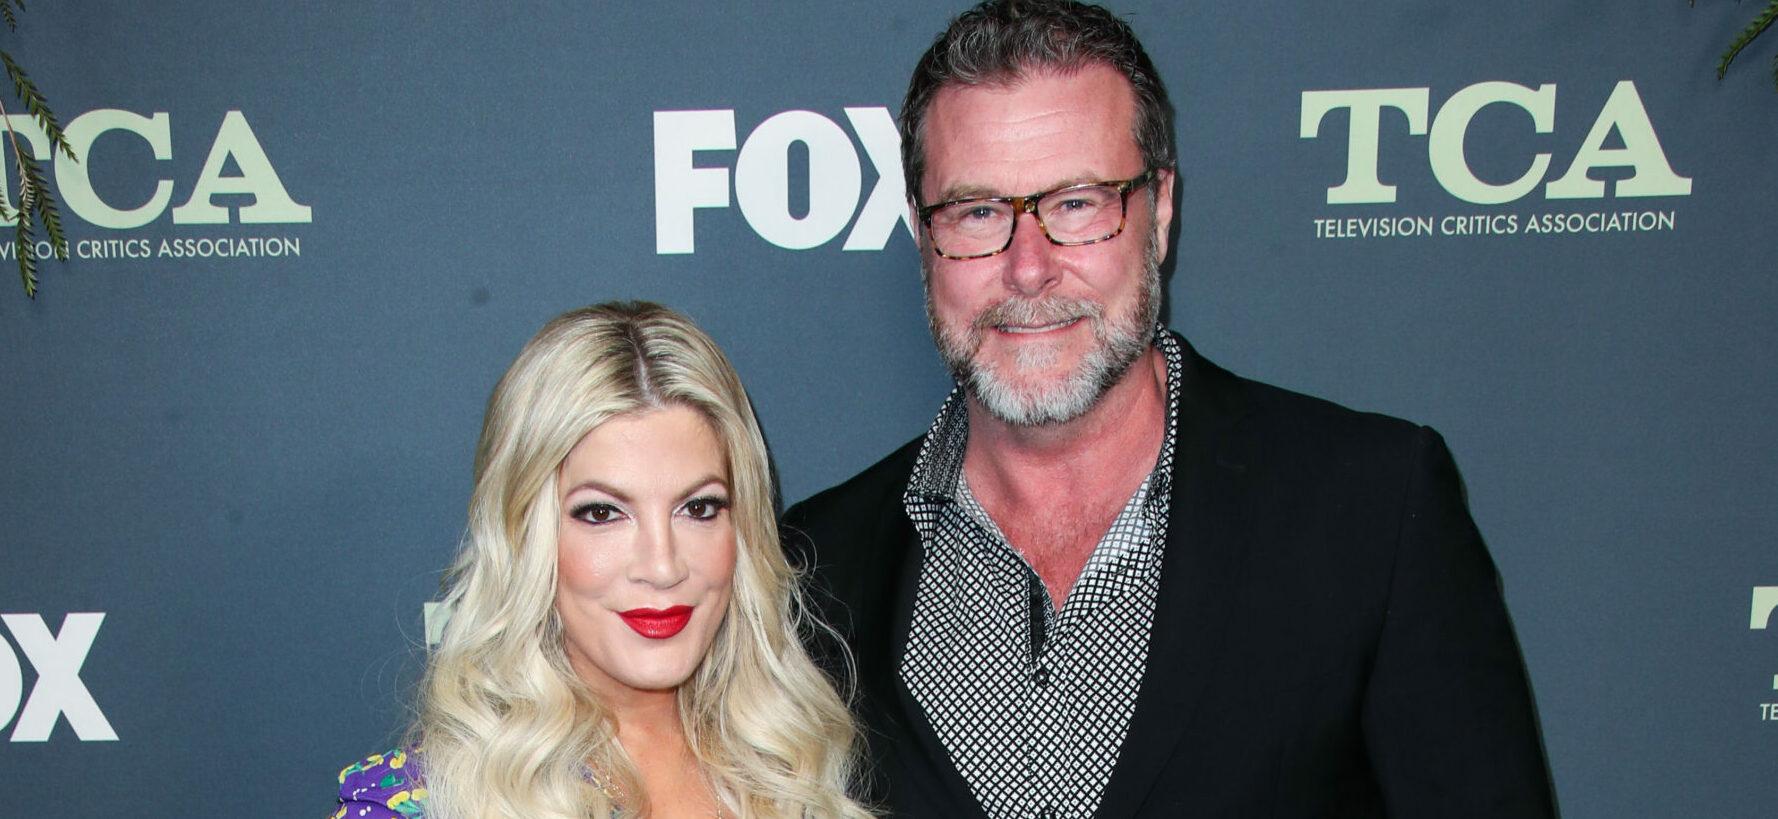 Tori Spelling’s Husband Allegedly Believes She Is Living In An RV ‘For Sympathy’ Not Financial Reasons